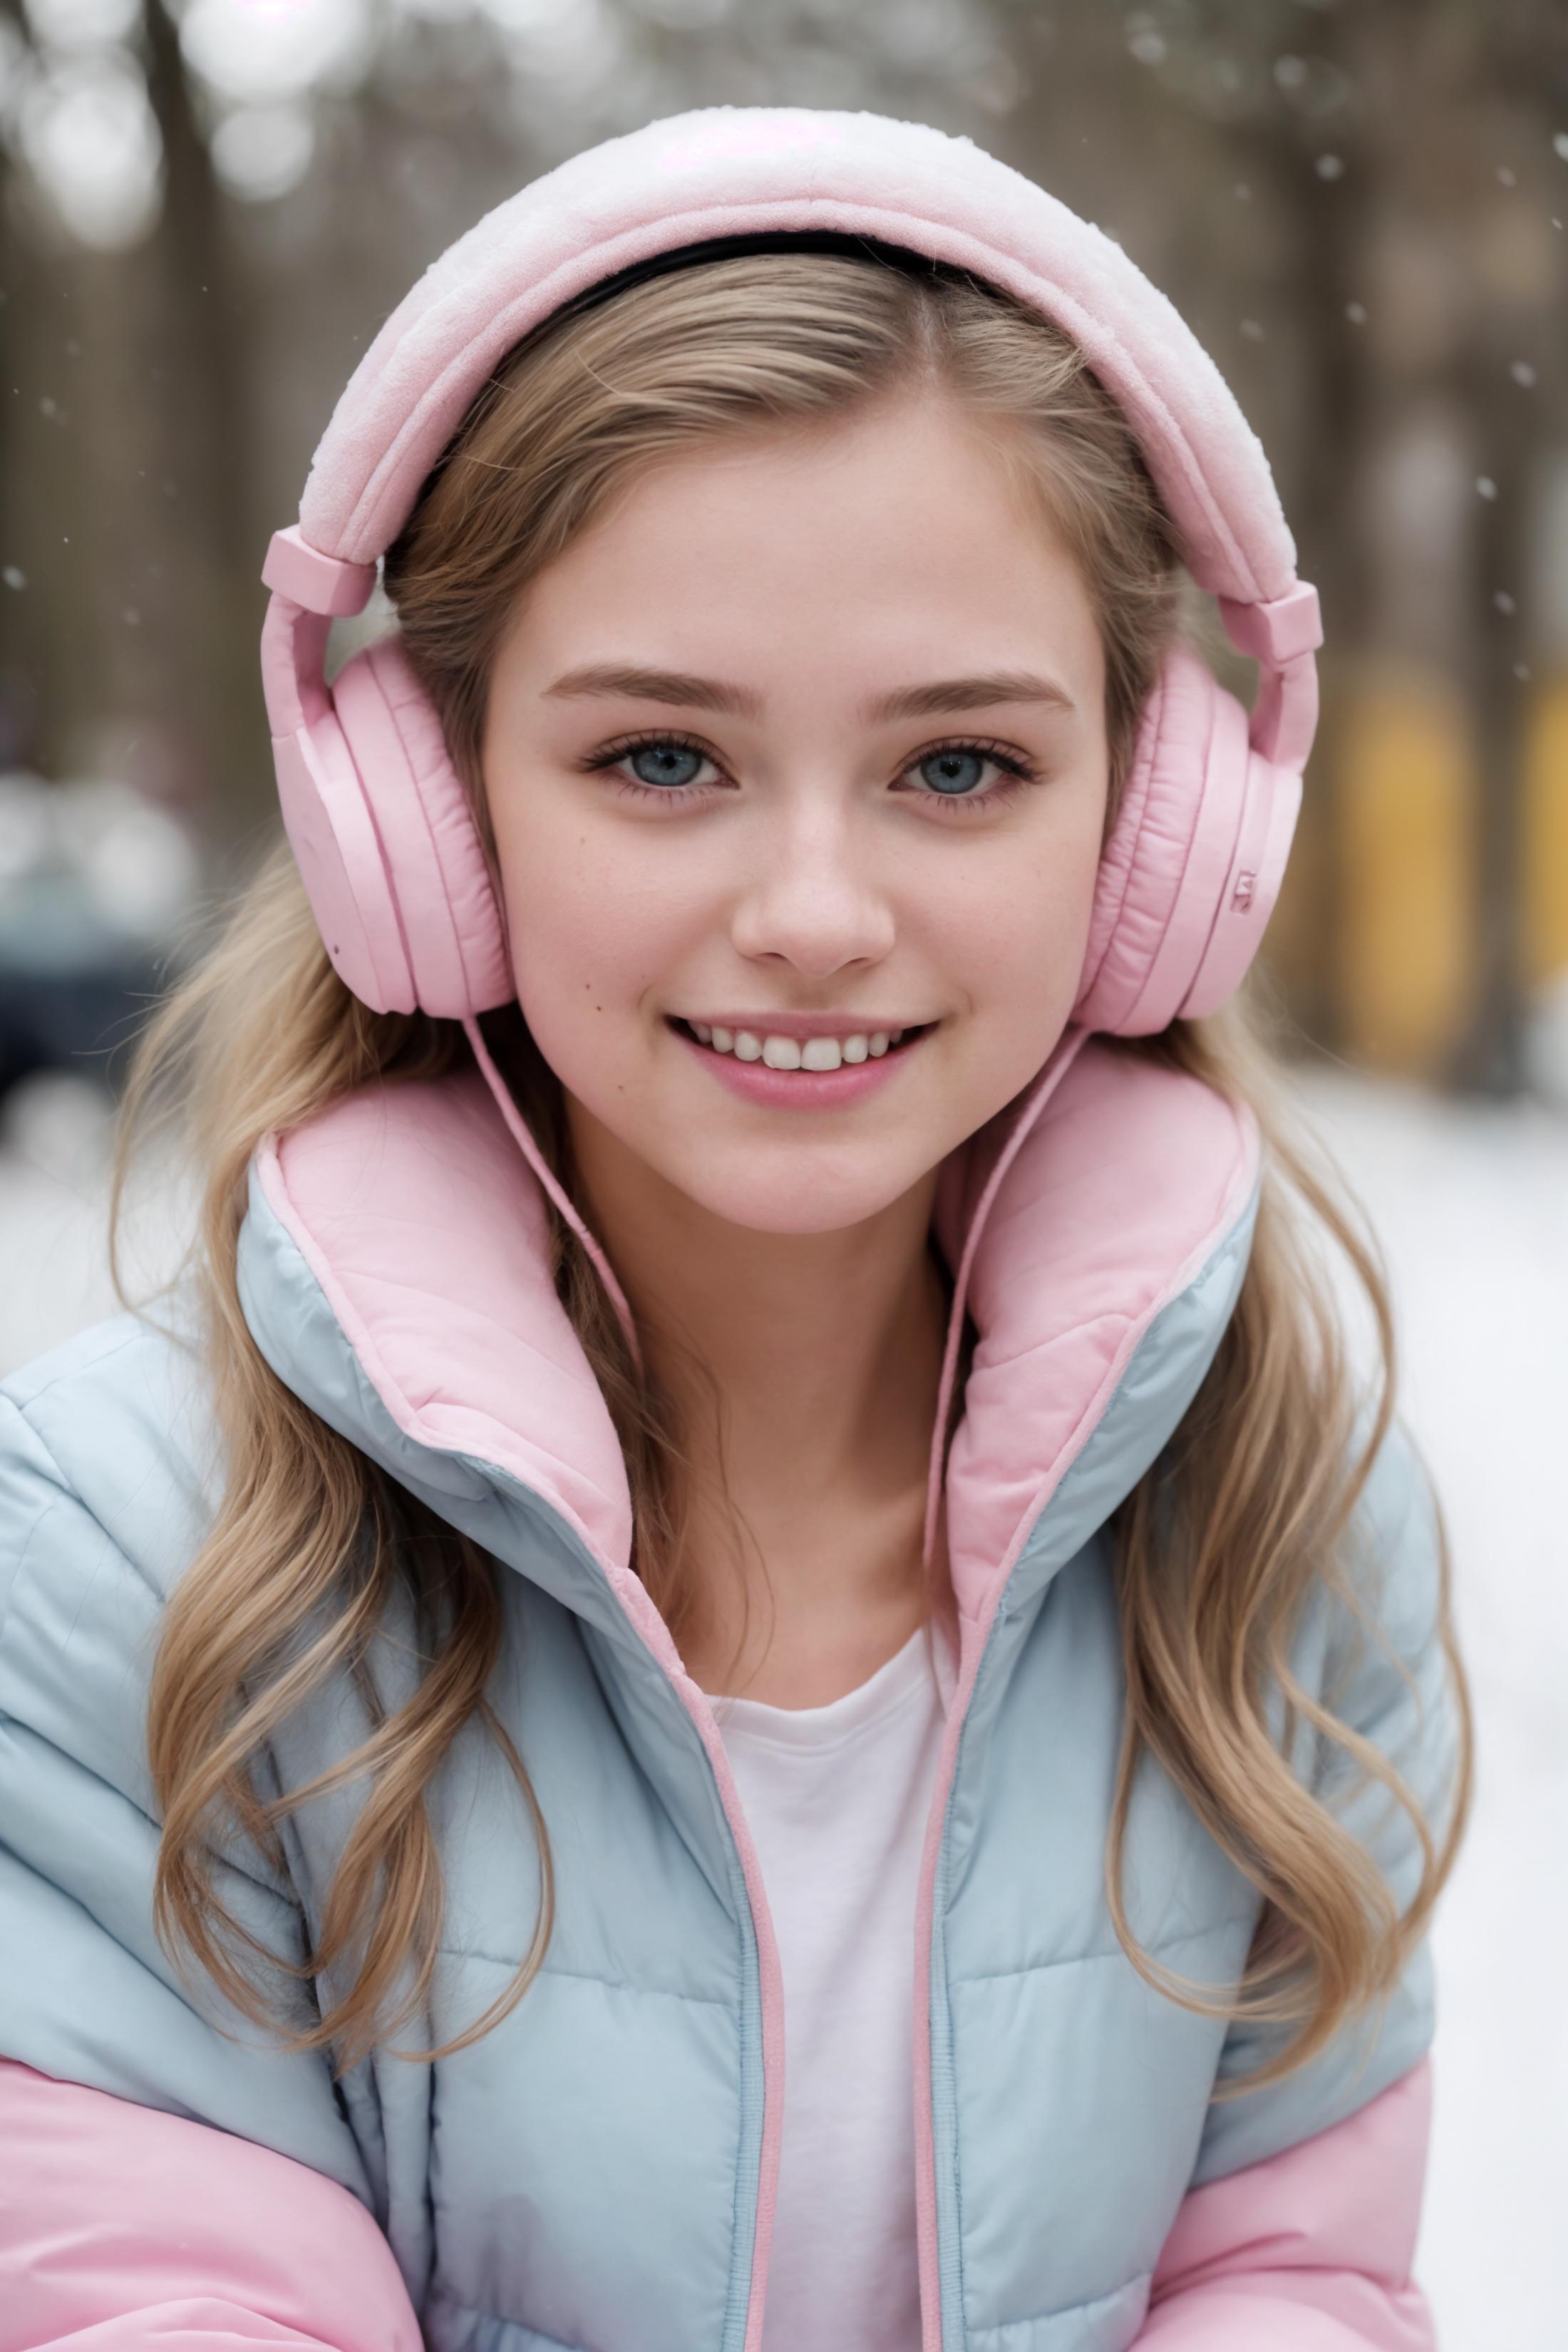 A woman wearing a blue jacket and pink headphones is smiling.